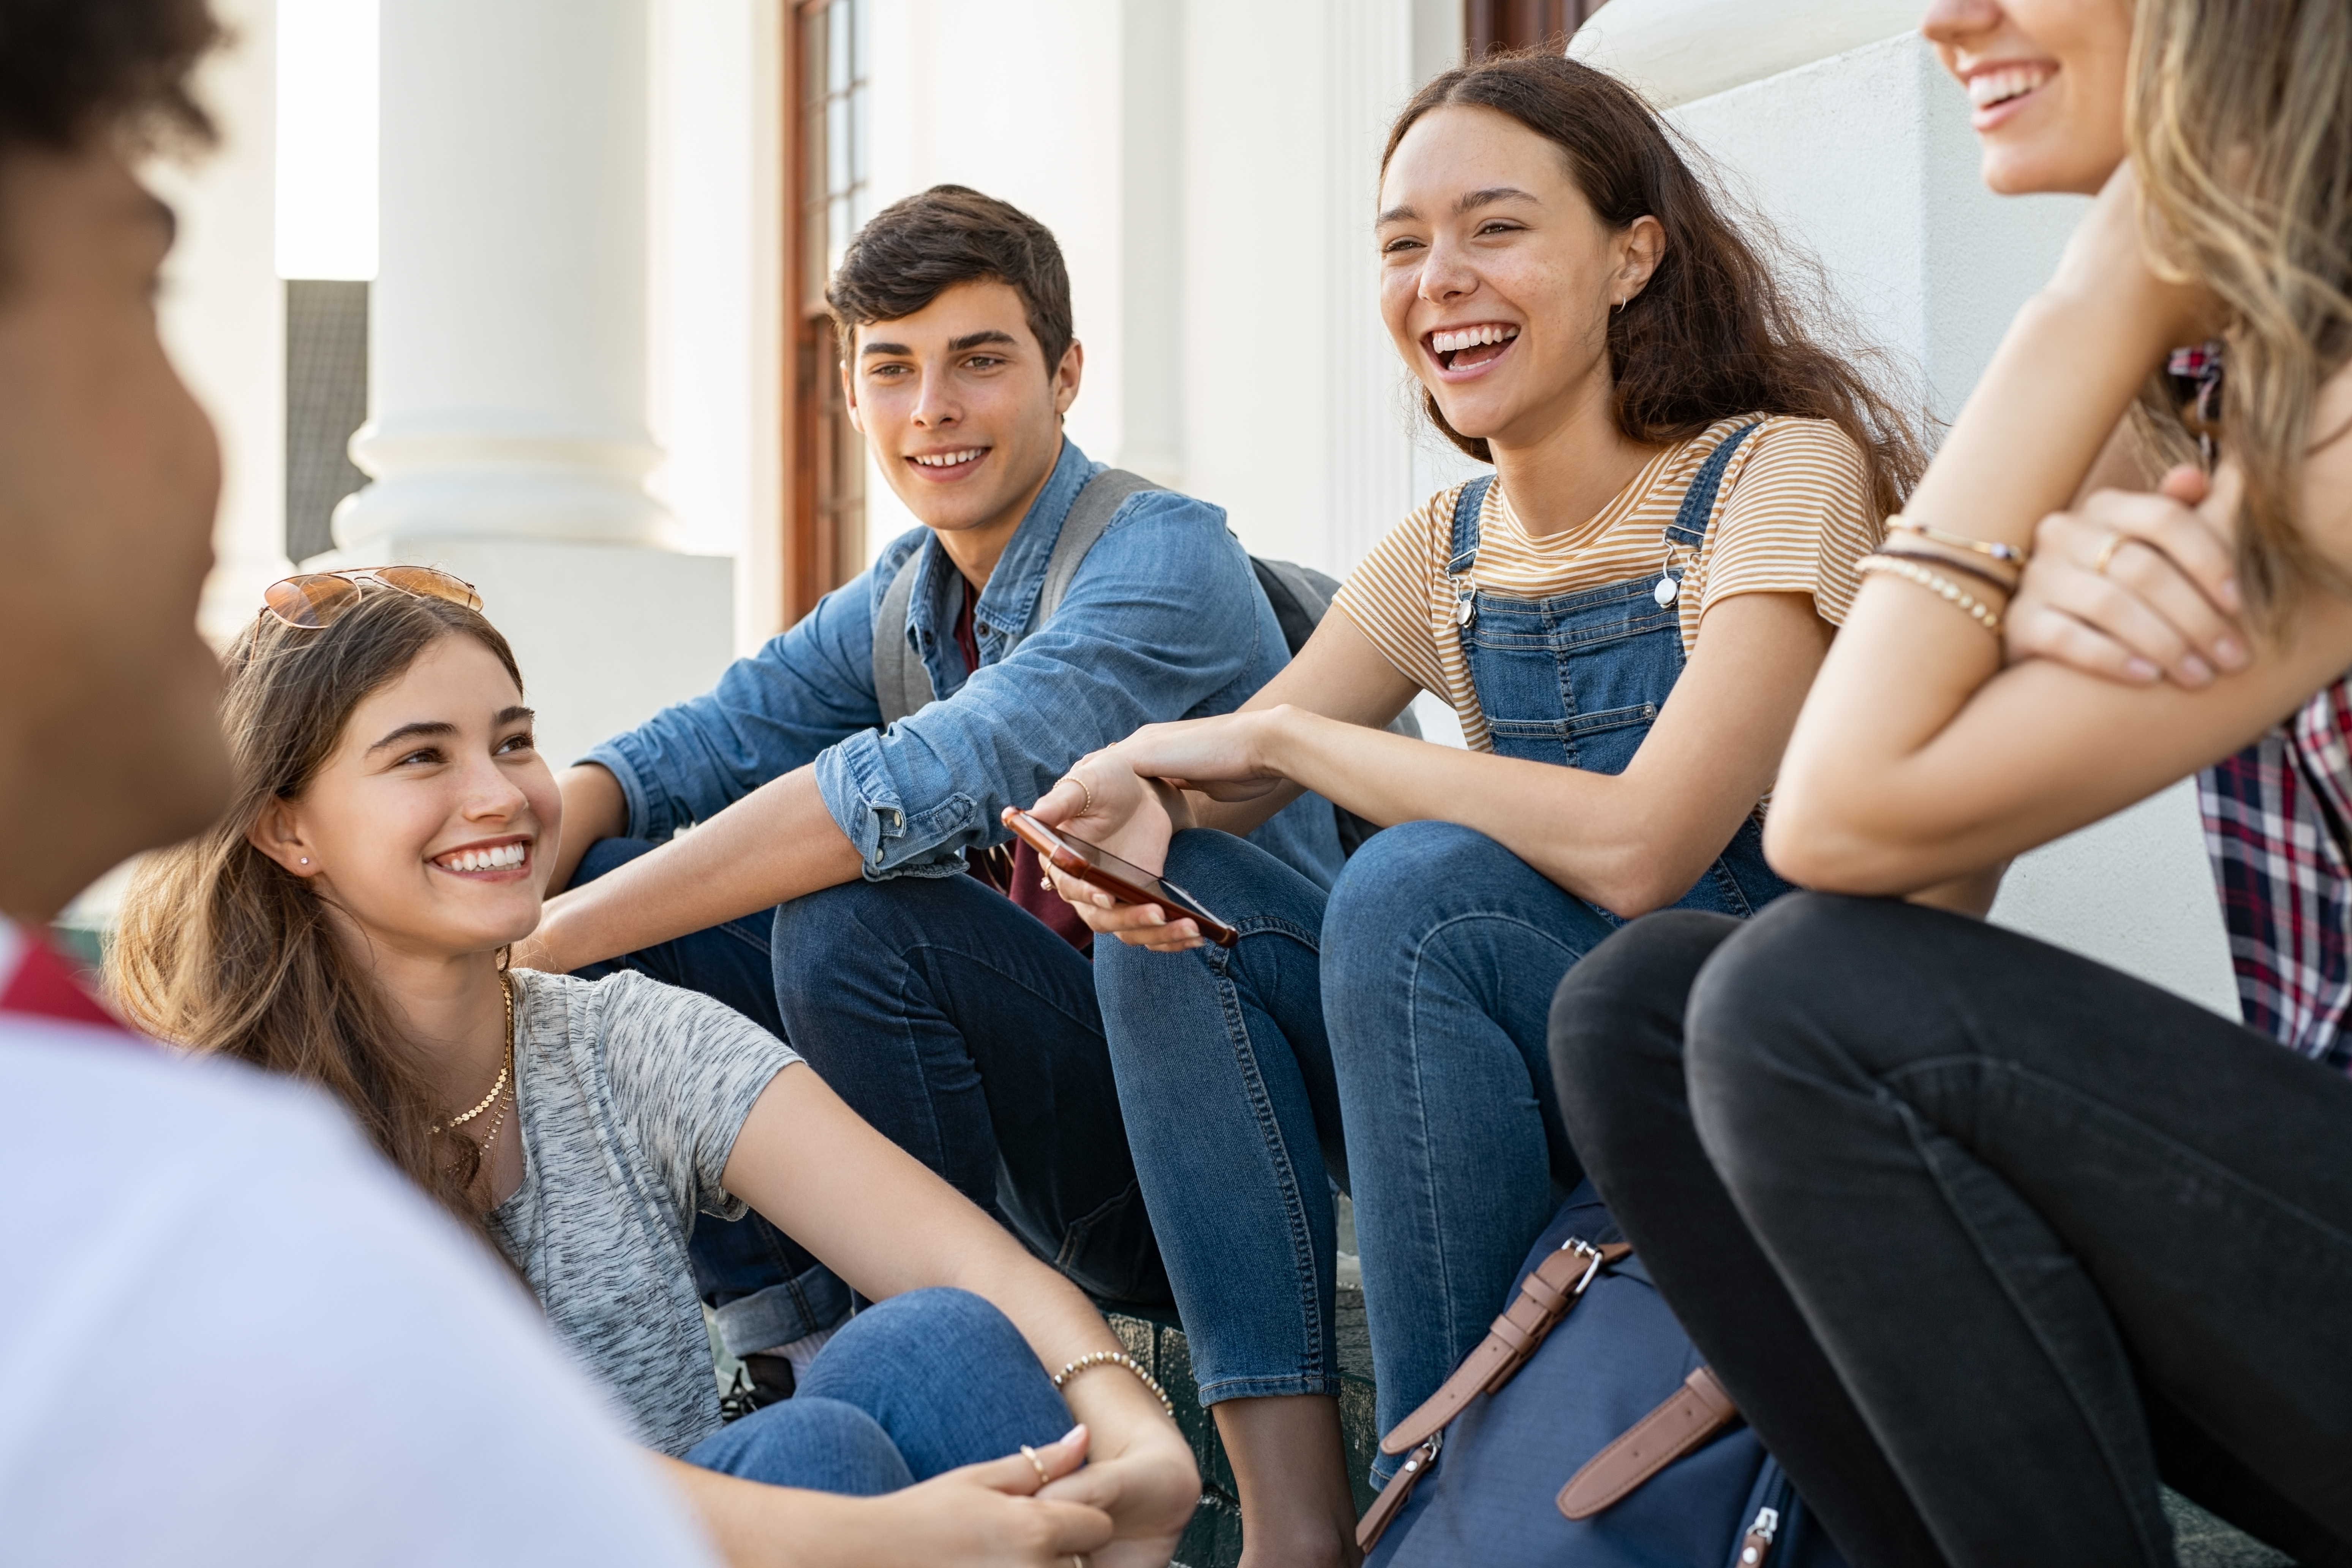 Positive Self-Talk for Adolescents